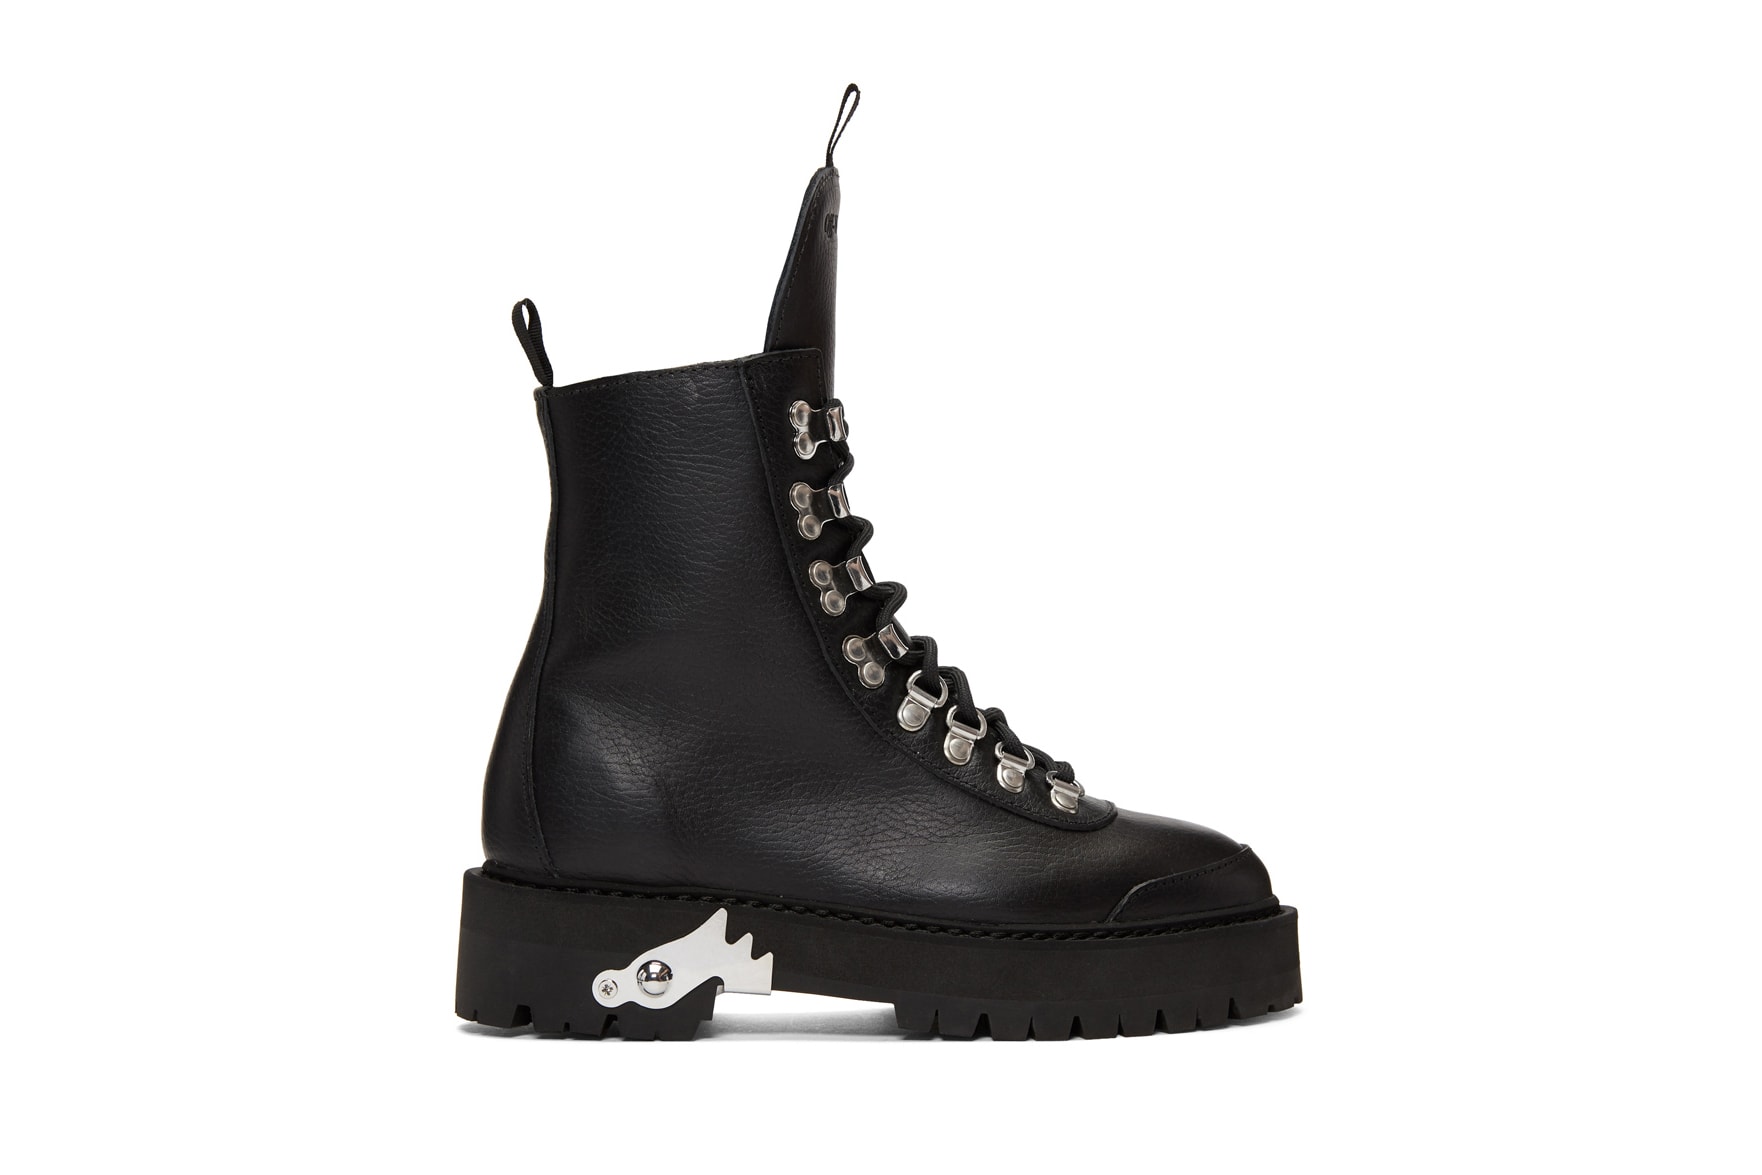 Off-White™ Hiking Boots in Brown and Black Combat Boots Virgil Abloh Lace Up Leather